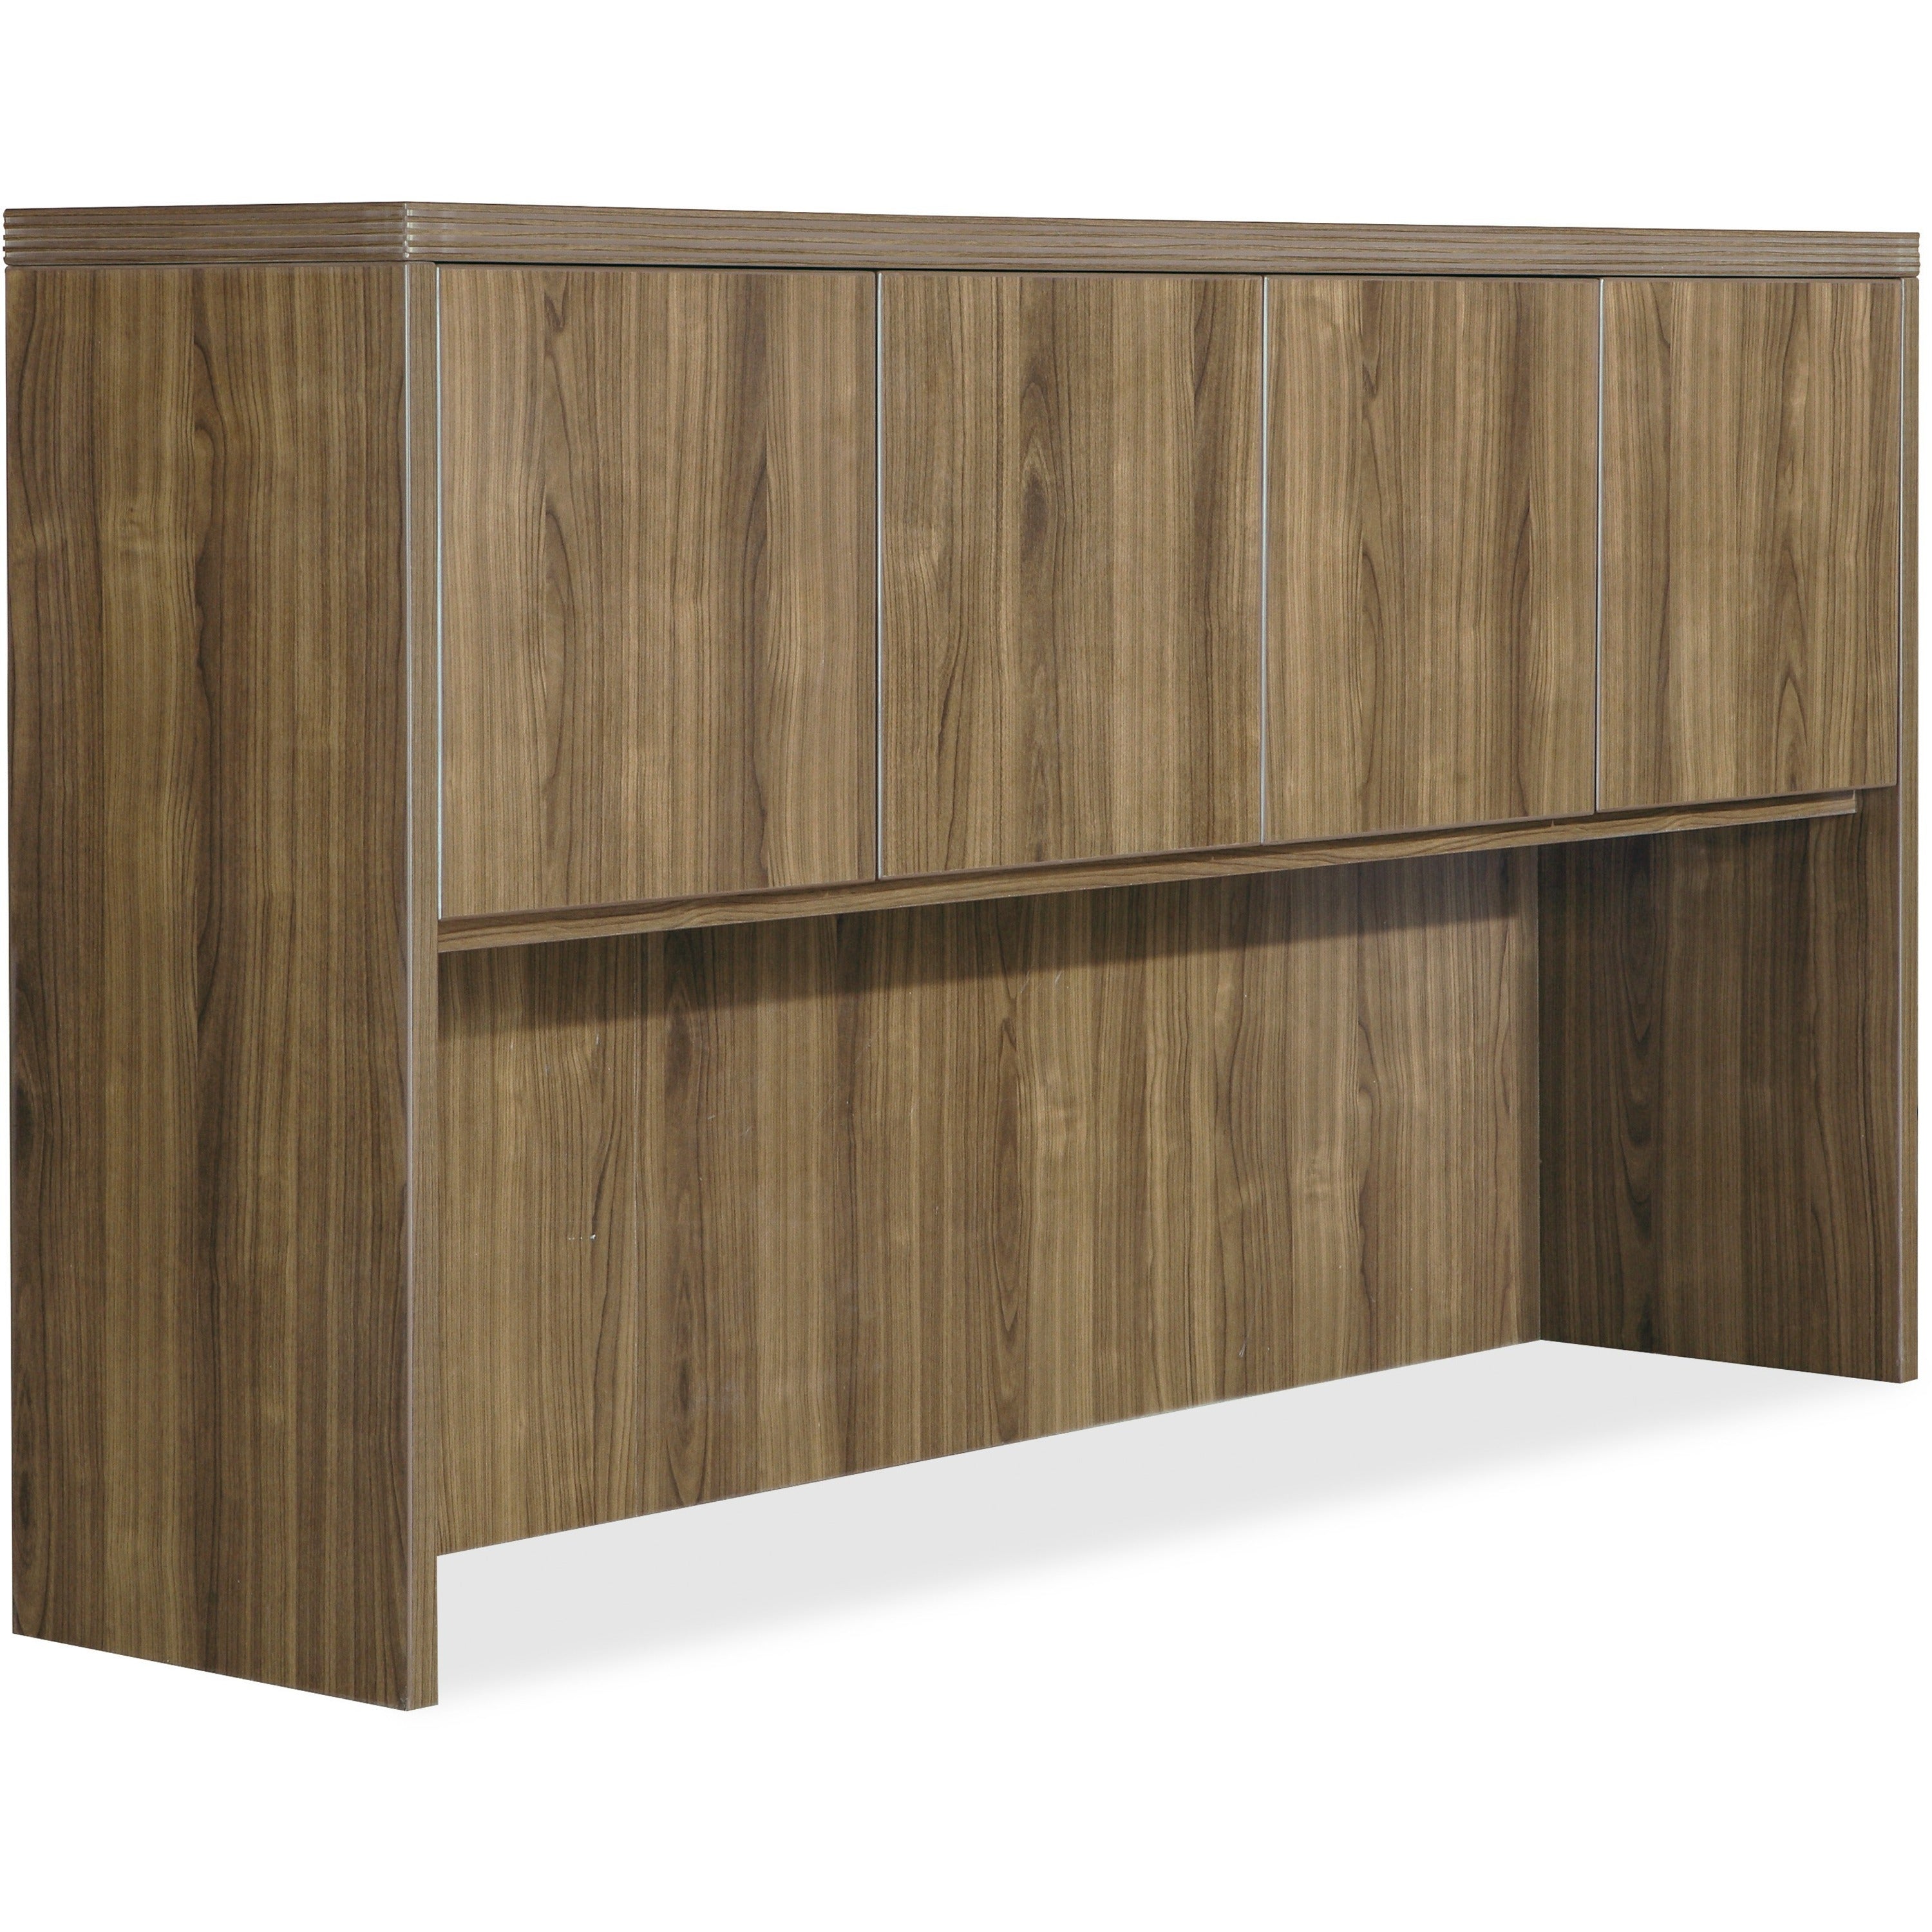 Lorell Chateau Series Hutch - 66.1" x 14.8"36.5" Hutch, 1.5" Top - 4 Door(s) - Reeded Edge - Material: P2 Particleboard - Finish: Walnut, Laminate - Durable - For Office - 